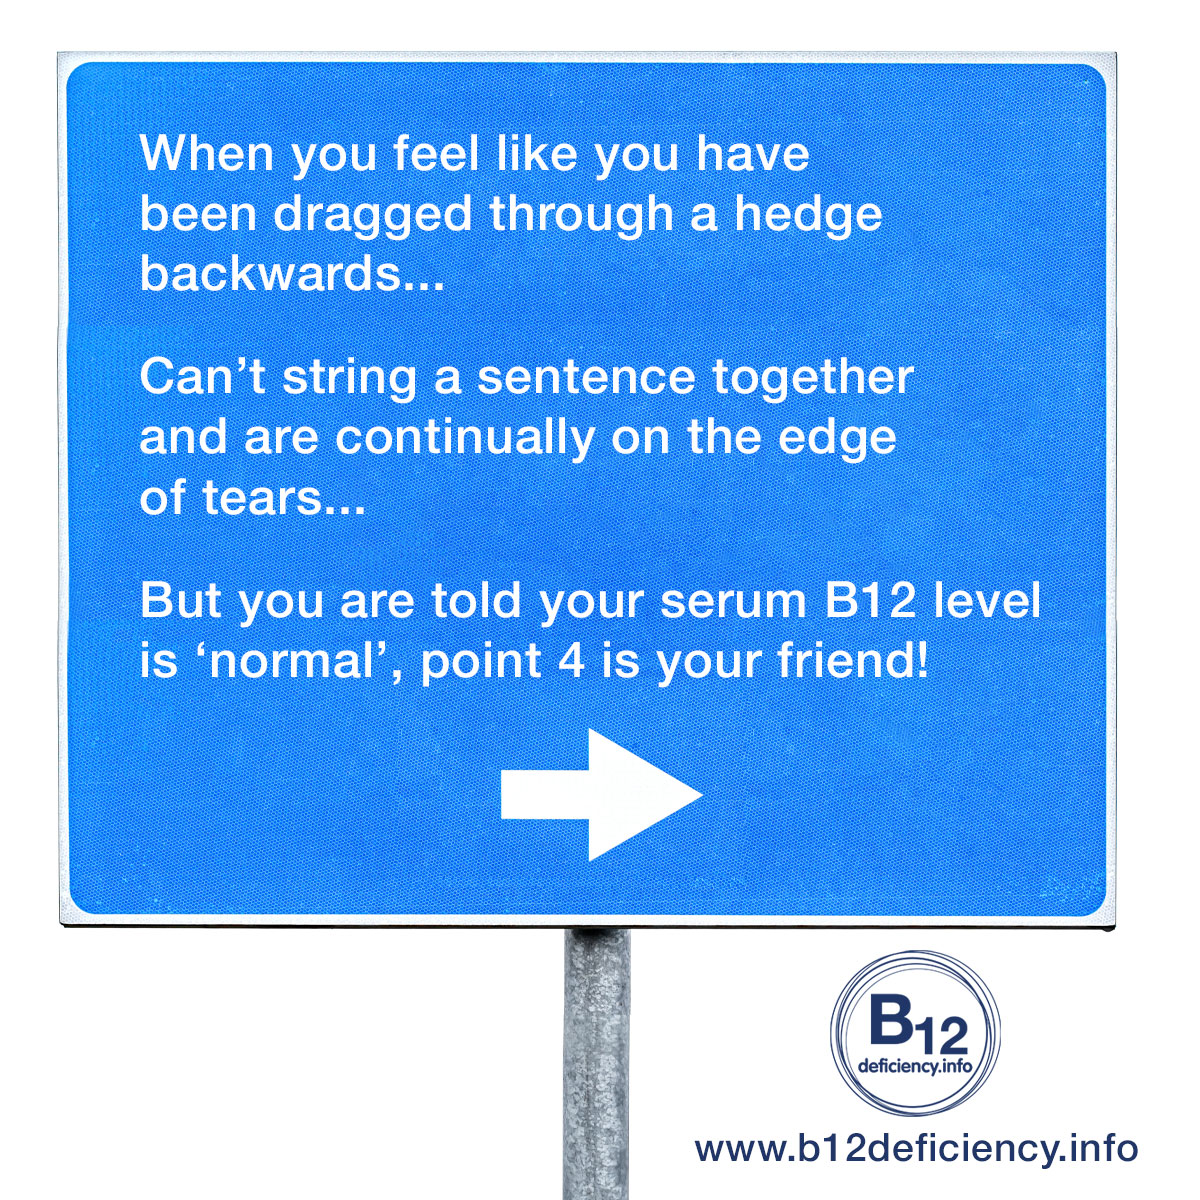 Your serum B12 is NORMAL – no action required.